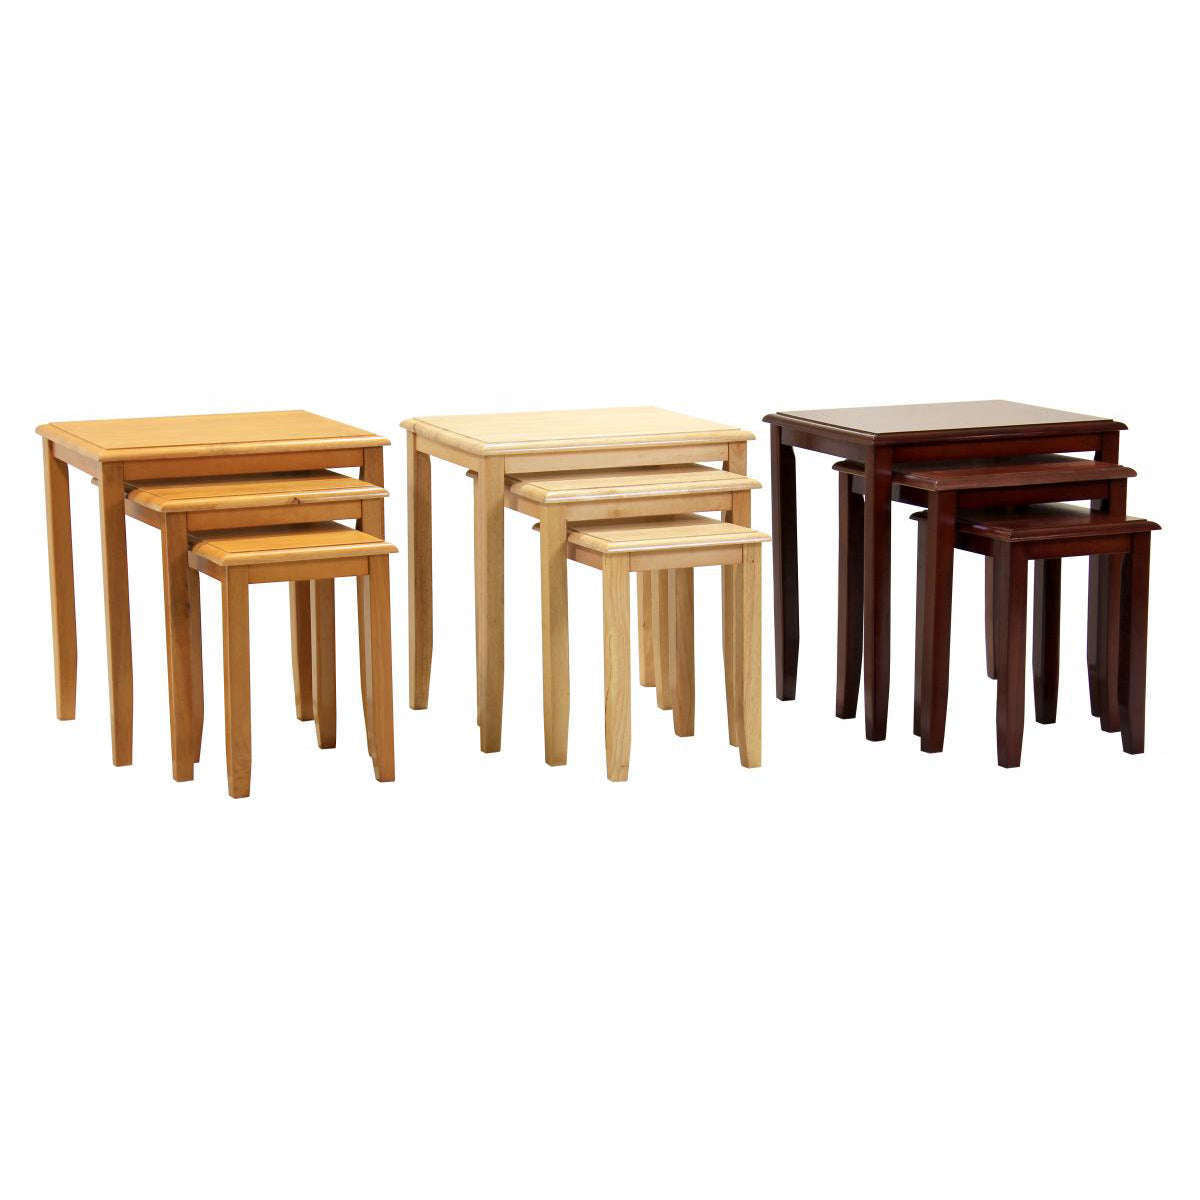 Ashpinoke:Kingfisher Solid Rubberwood Nest of Tables Maple,Nest of Tables,Heartlands Furniture